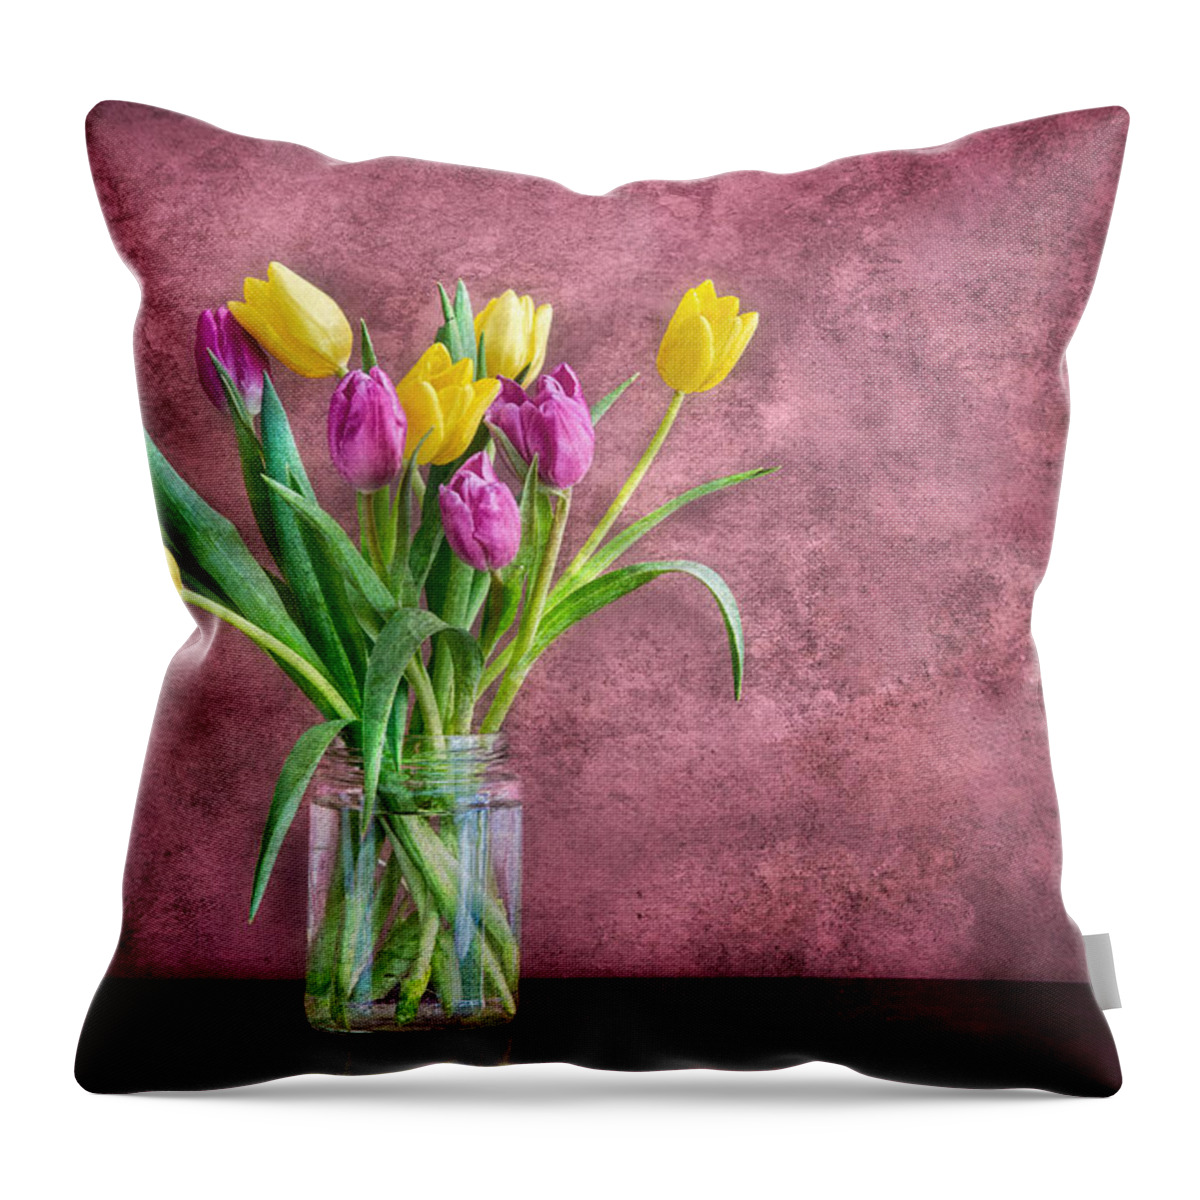 Flowers Throw Pillow featuring the photograph Tulips by Darylann Leonard Photography